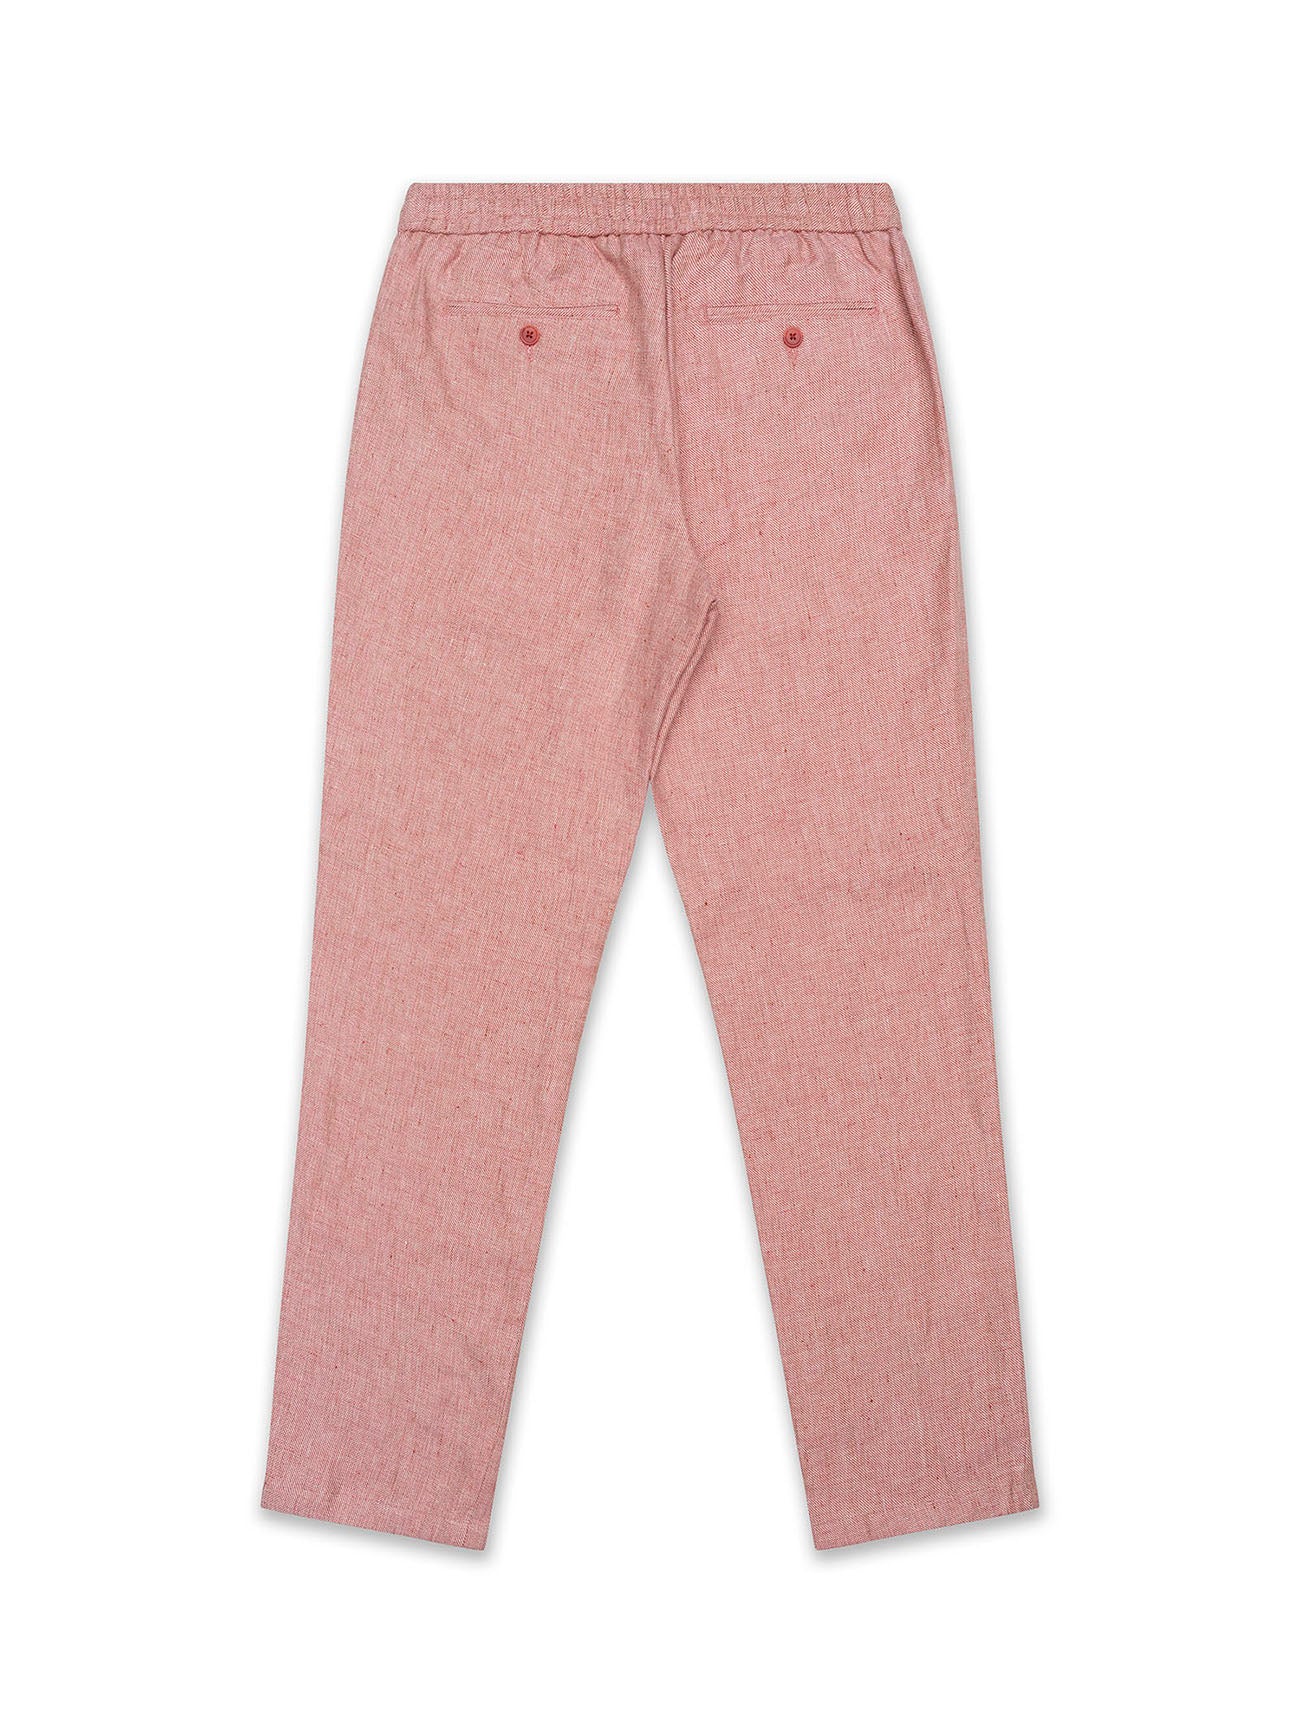 Coral Red Linen Jogger Pant